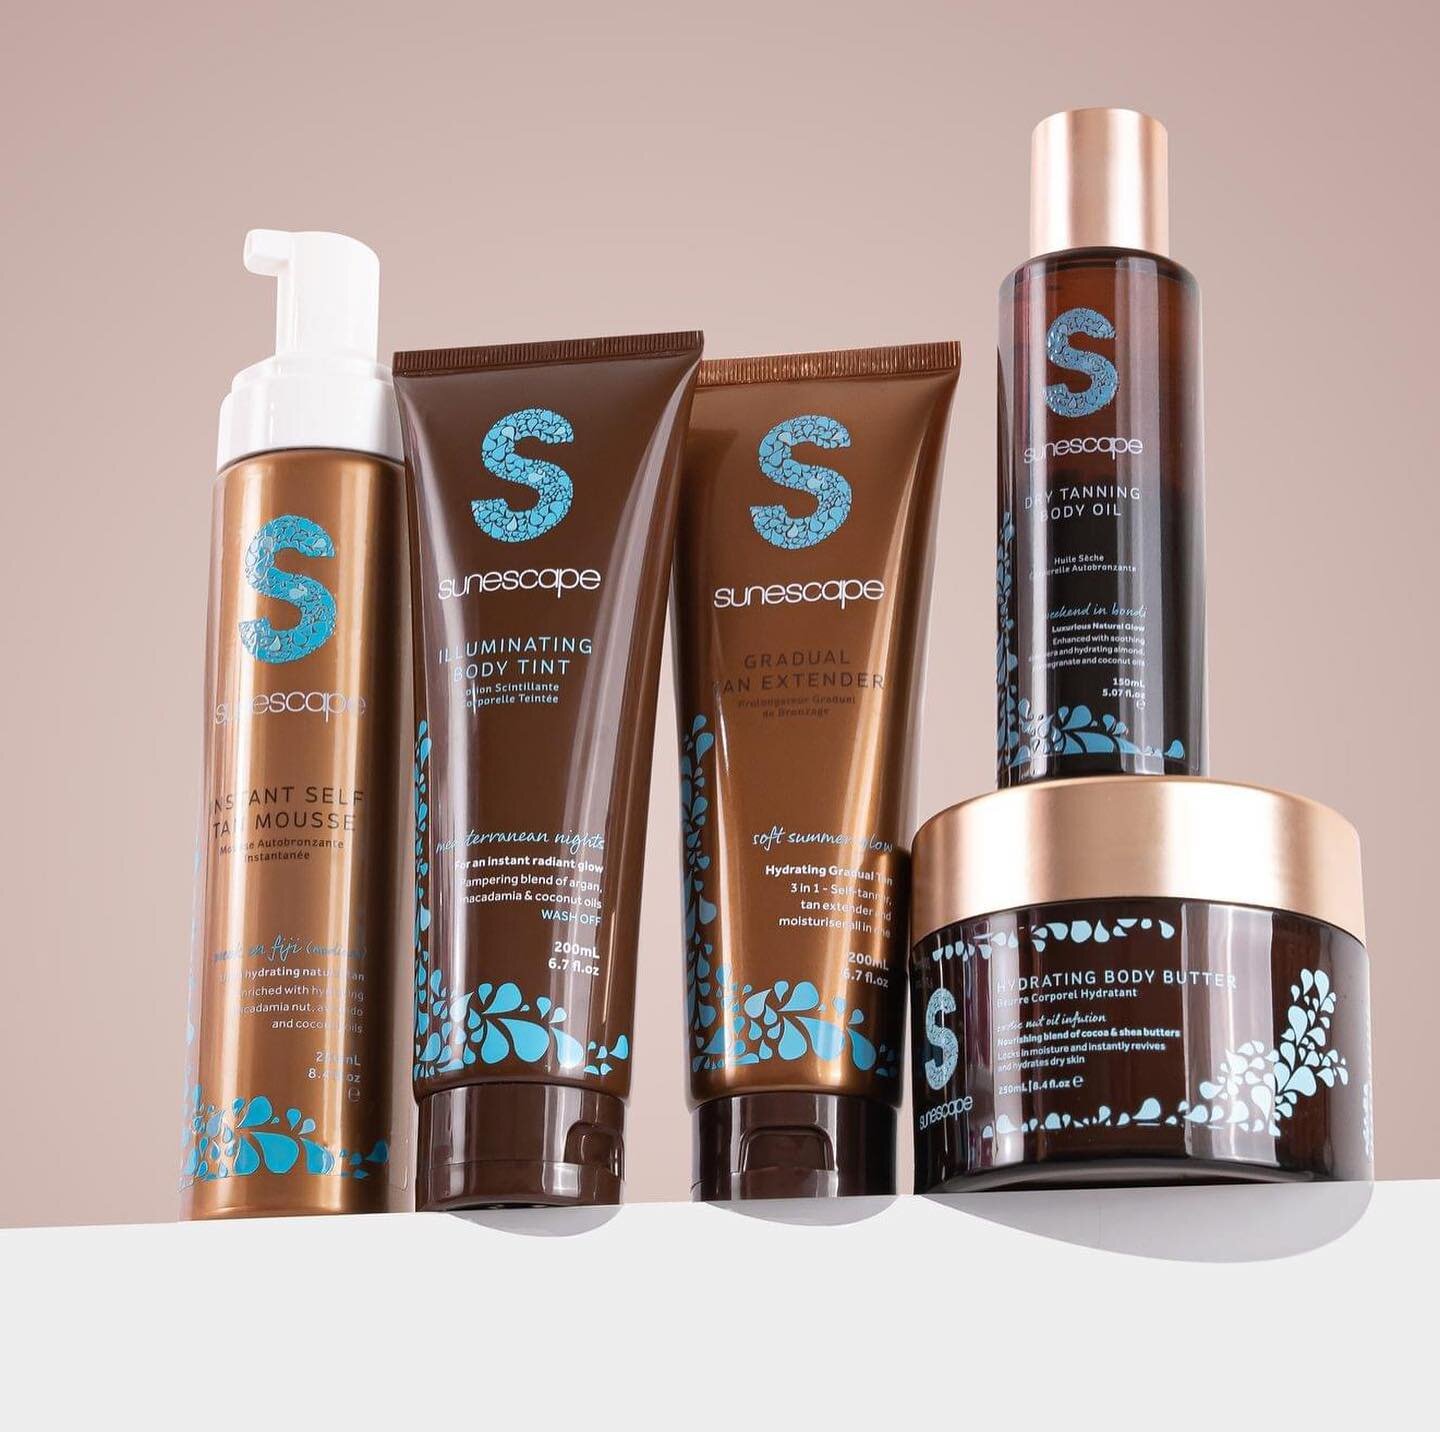 I am a Sunescape tanning stockist.
Australian made &amp; owned.
Spray tans.
Tanning home care. 
#ae #abbeyedwards #skinandbeauty #bronzed #sunescape #tanning #spraytan #hometanning #homecare #onlinestore